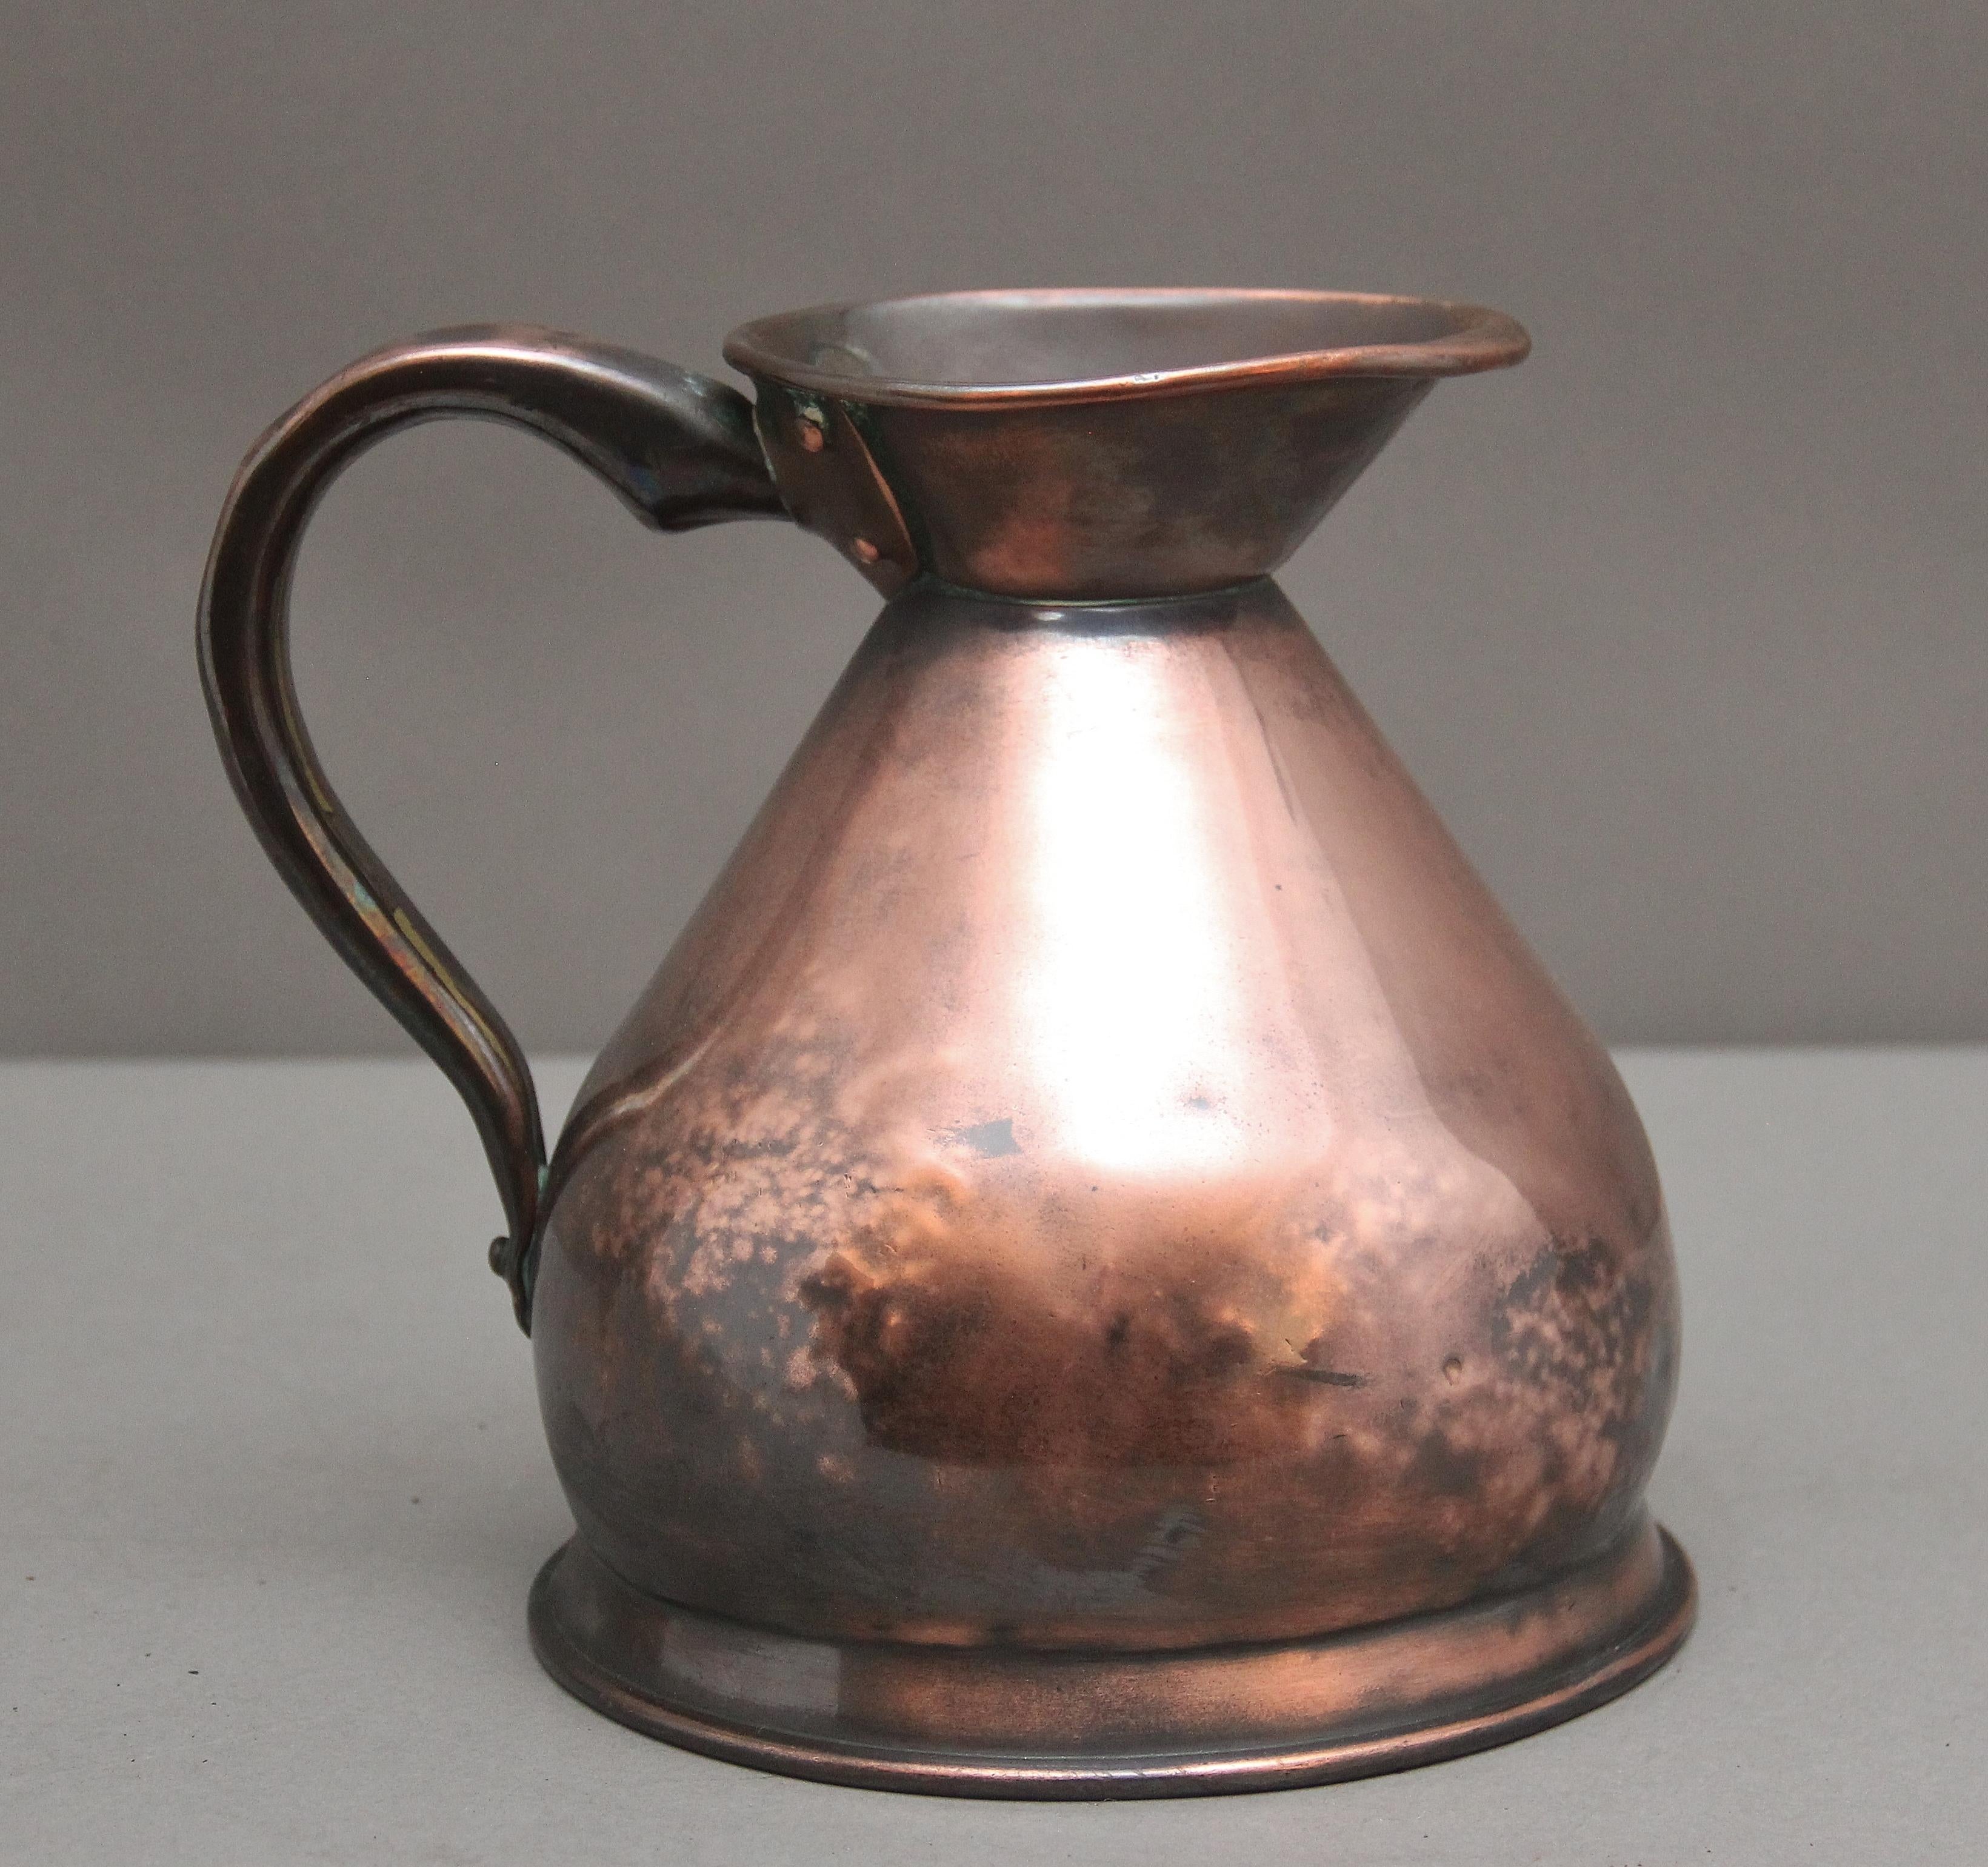 19th Century half gallon copper haystack measuring jug in very good condition and marked at the front with 1/2 gallon, having a large shaped handle to one side, the haystack jug named for it's wide based form and having a large spout.  Circa 1870.